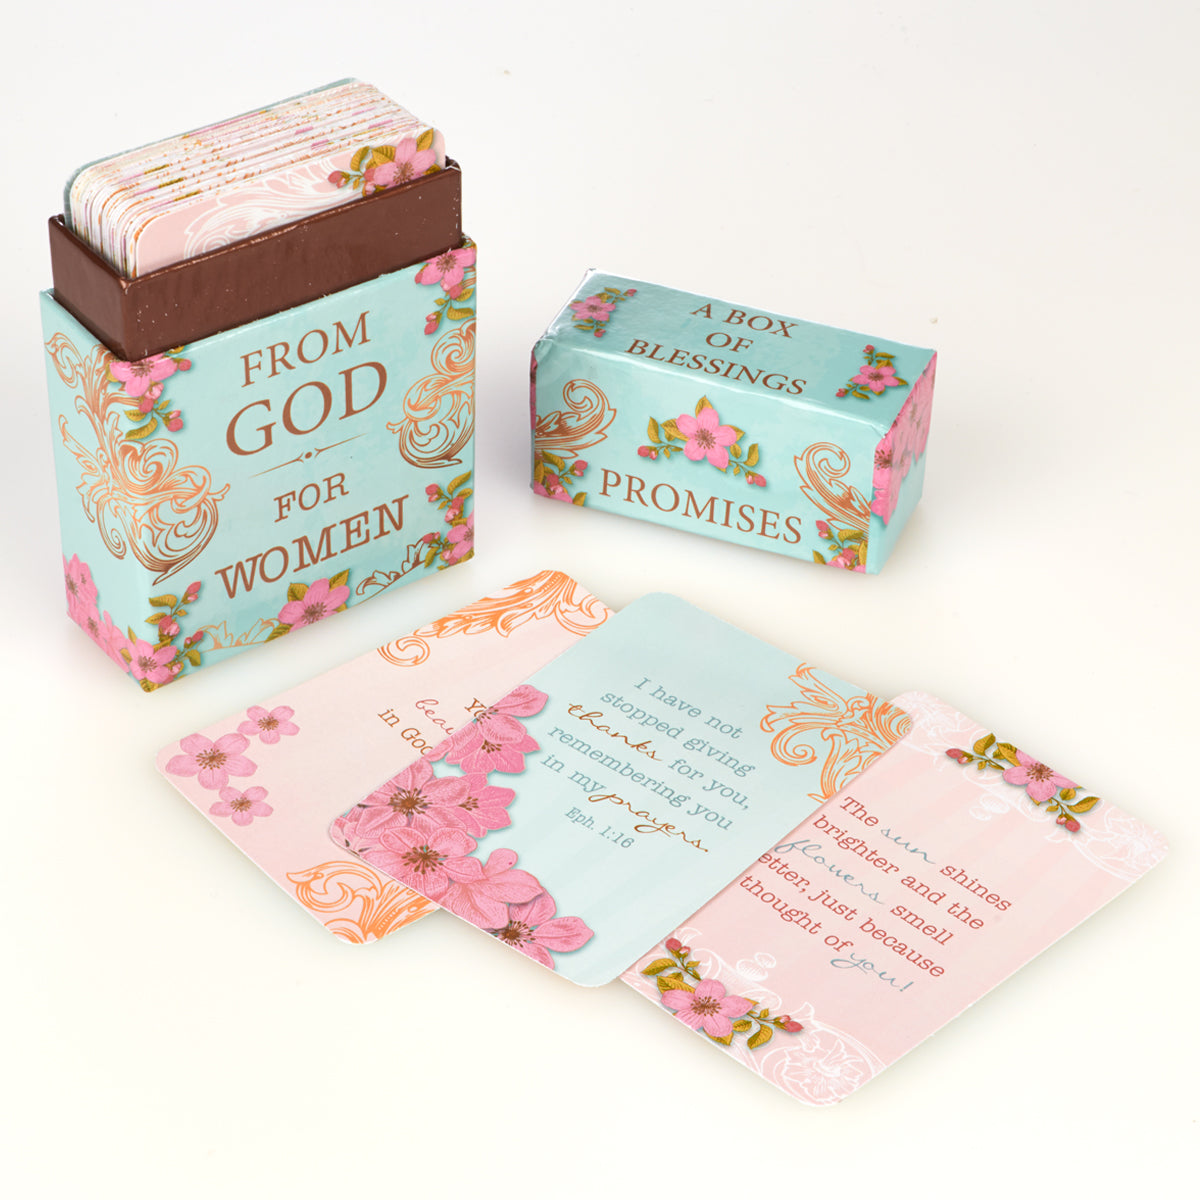 Promises from God for Women Box of Blessings - The Christian Gift Company